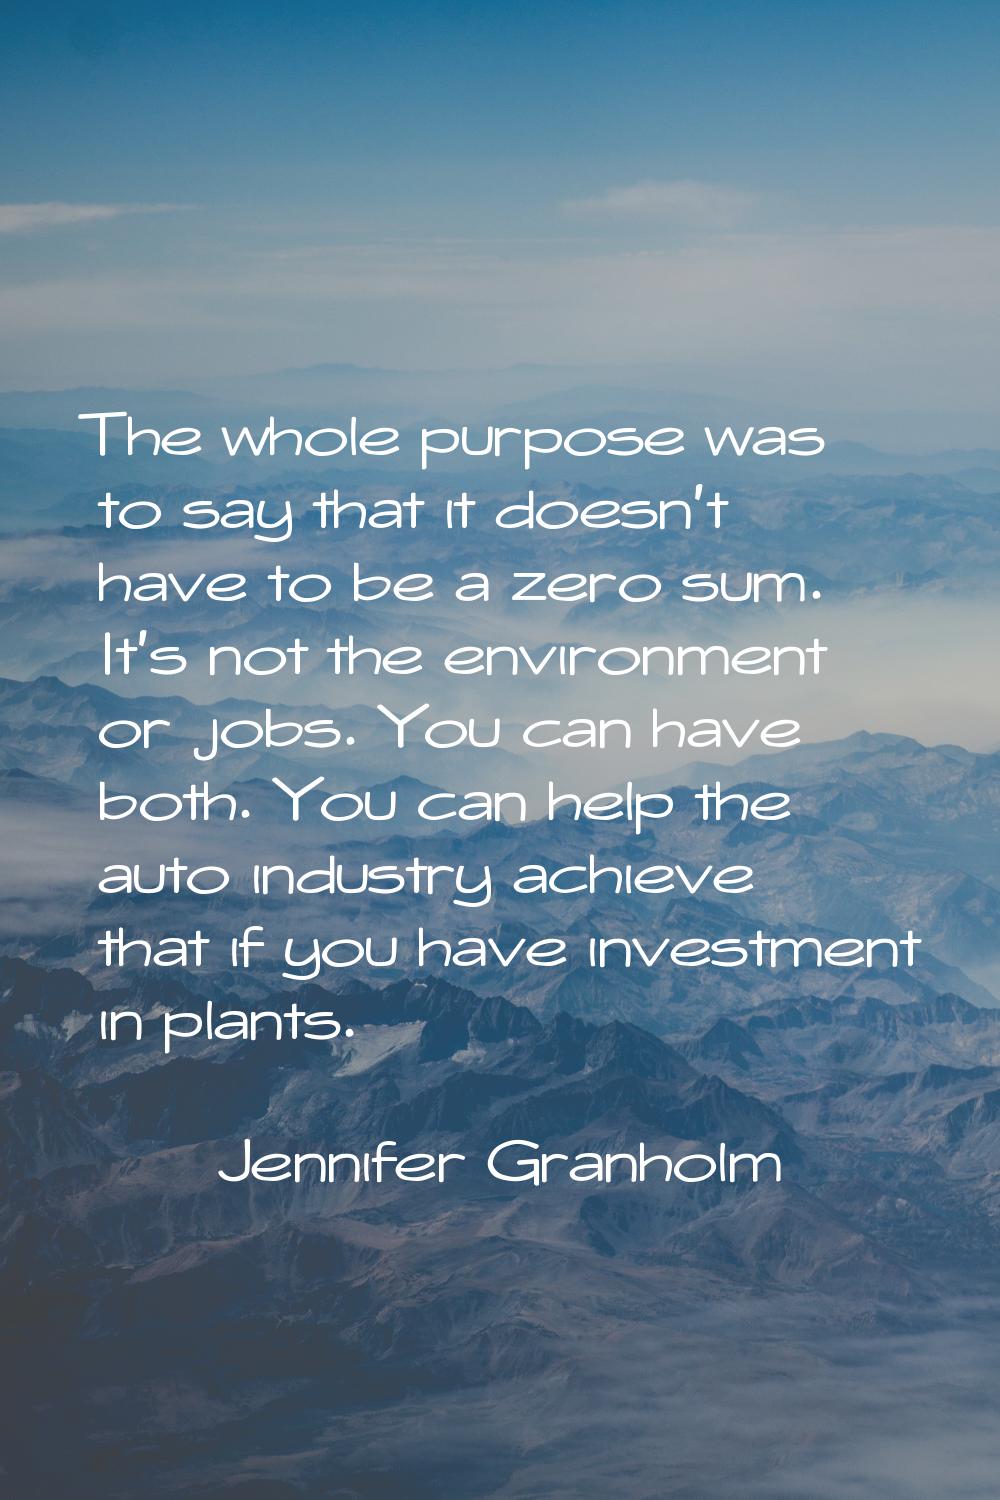 The whole purpose was to say that it doesn't have to be a zero sum. It's not the environment or job